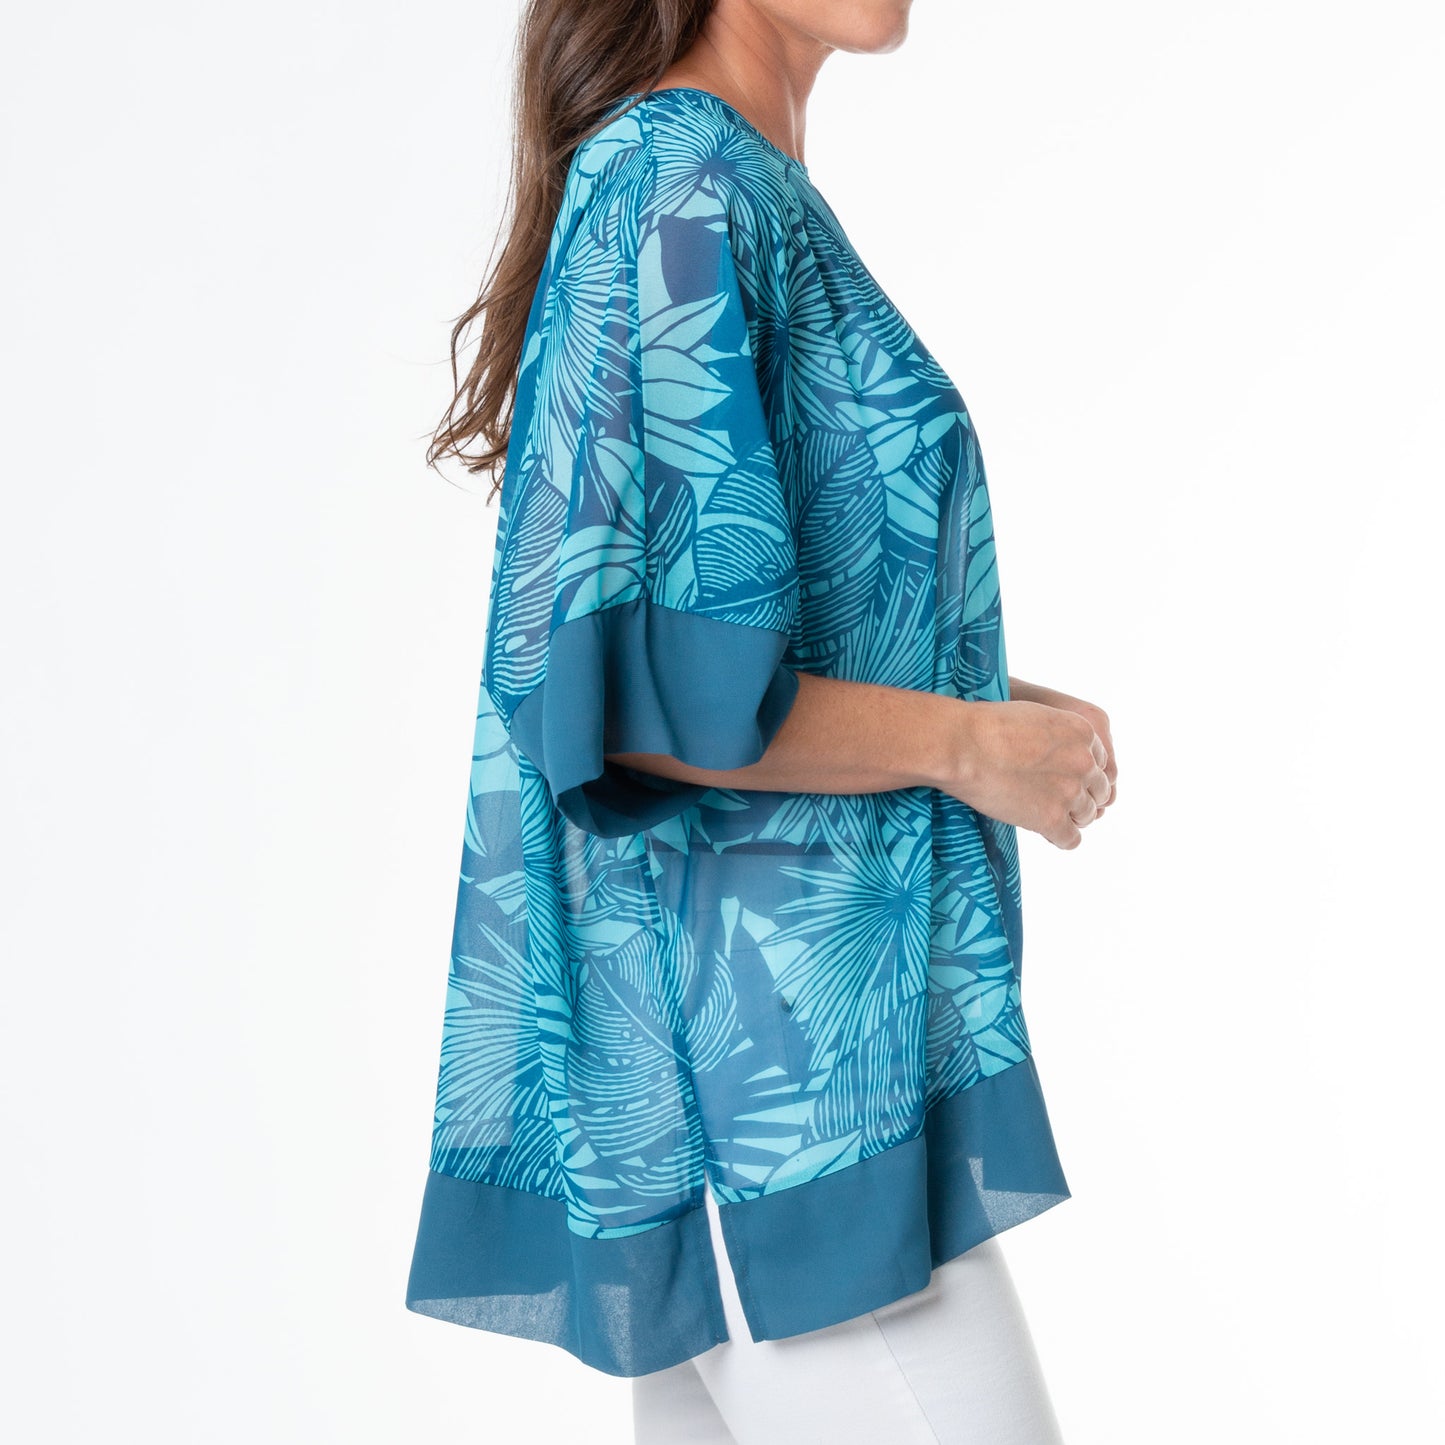 Lexi One Size Sheer Poncho Swimsuit Cover Up